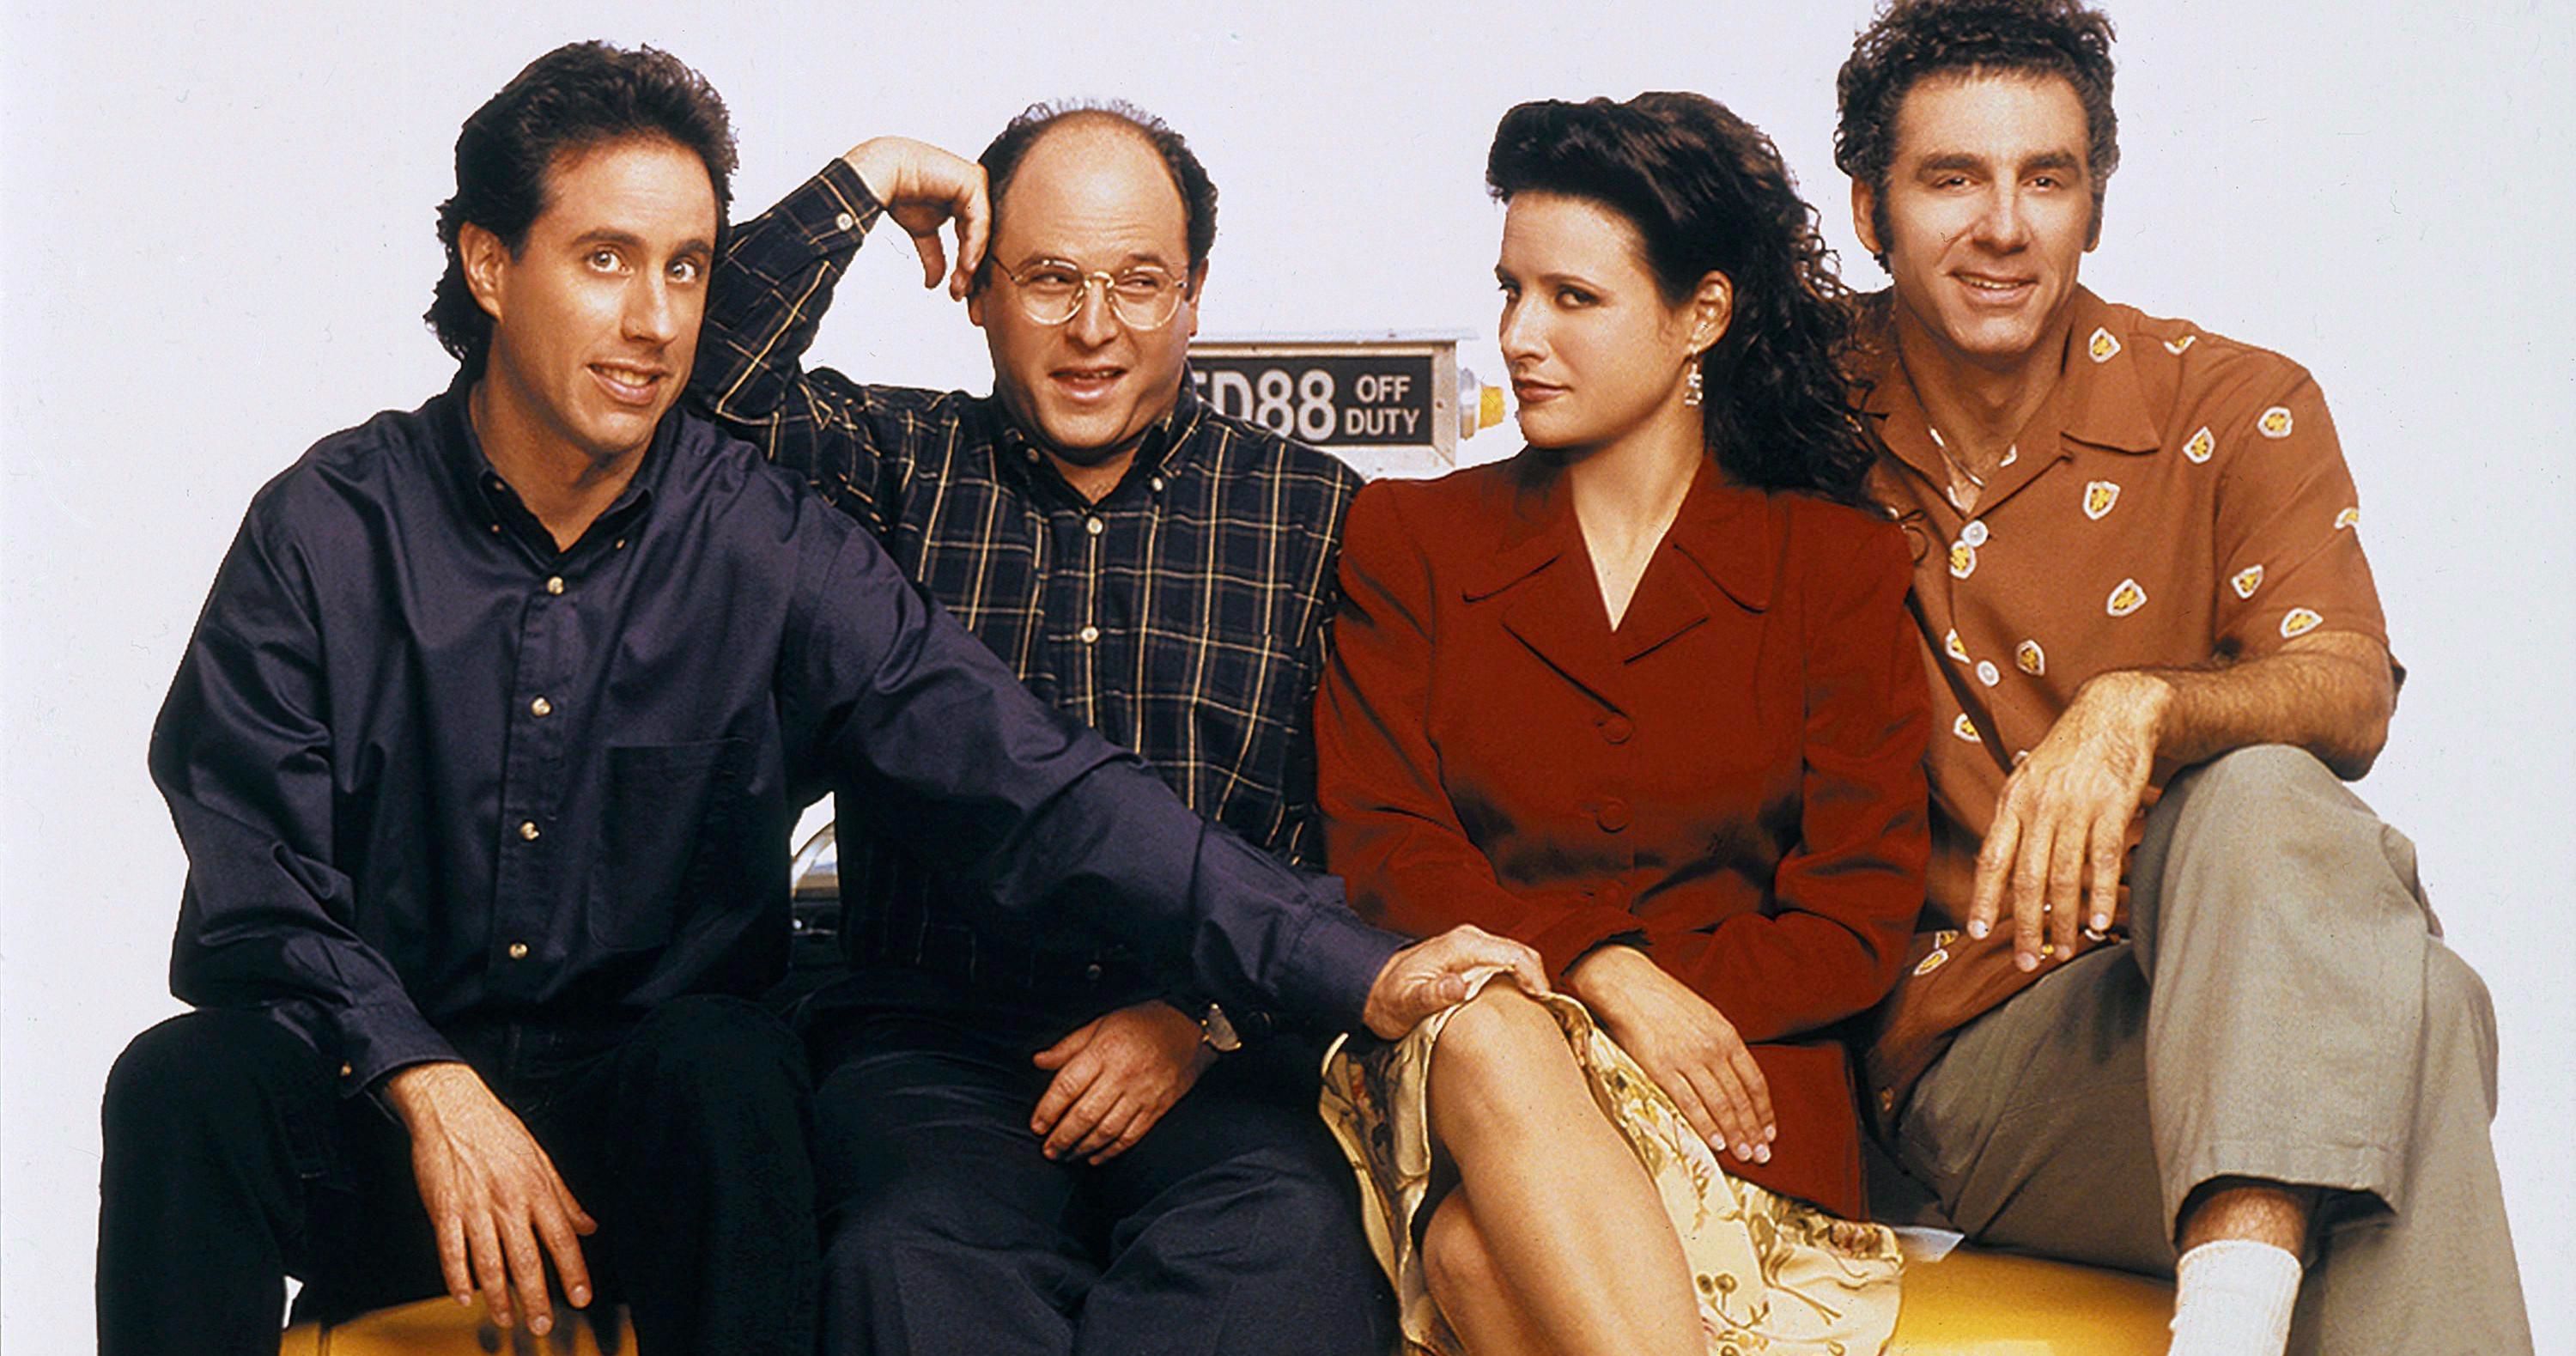 Seinfeld Is Coming to Netflix in 2021, Will Stream in 4K for First Time Ever